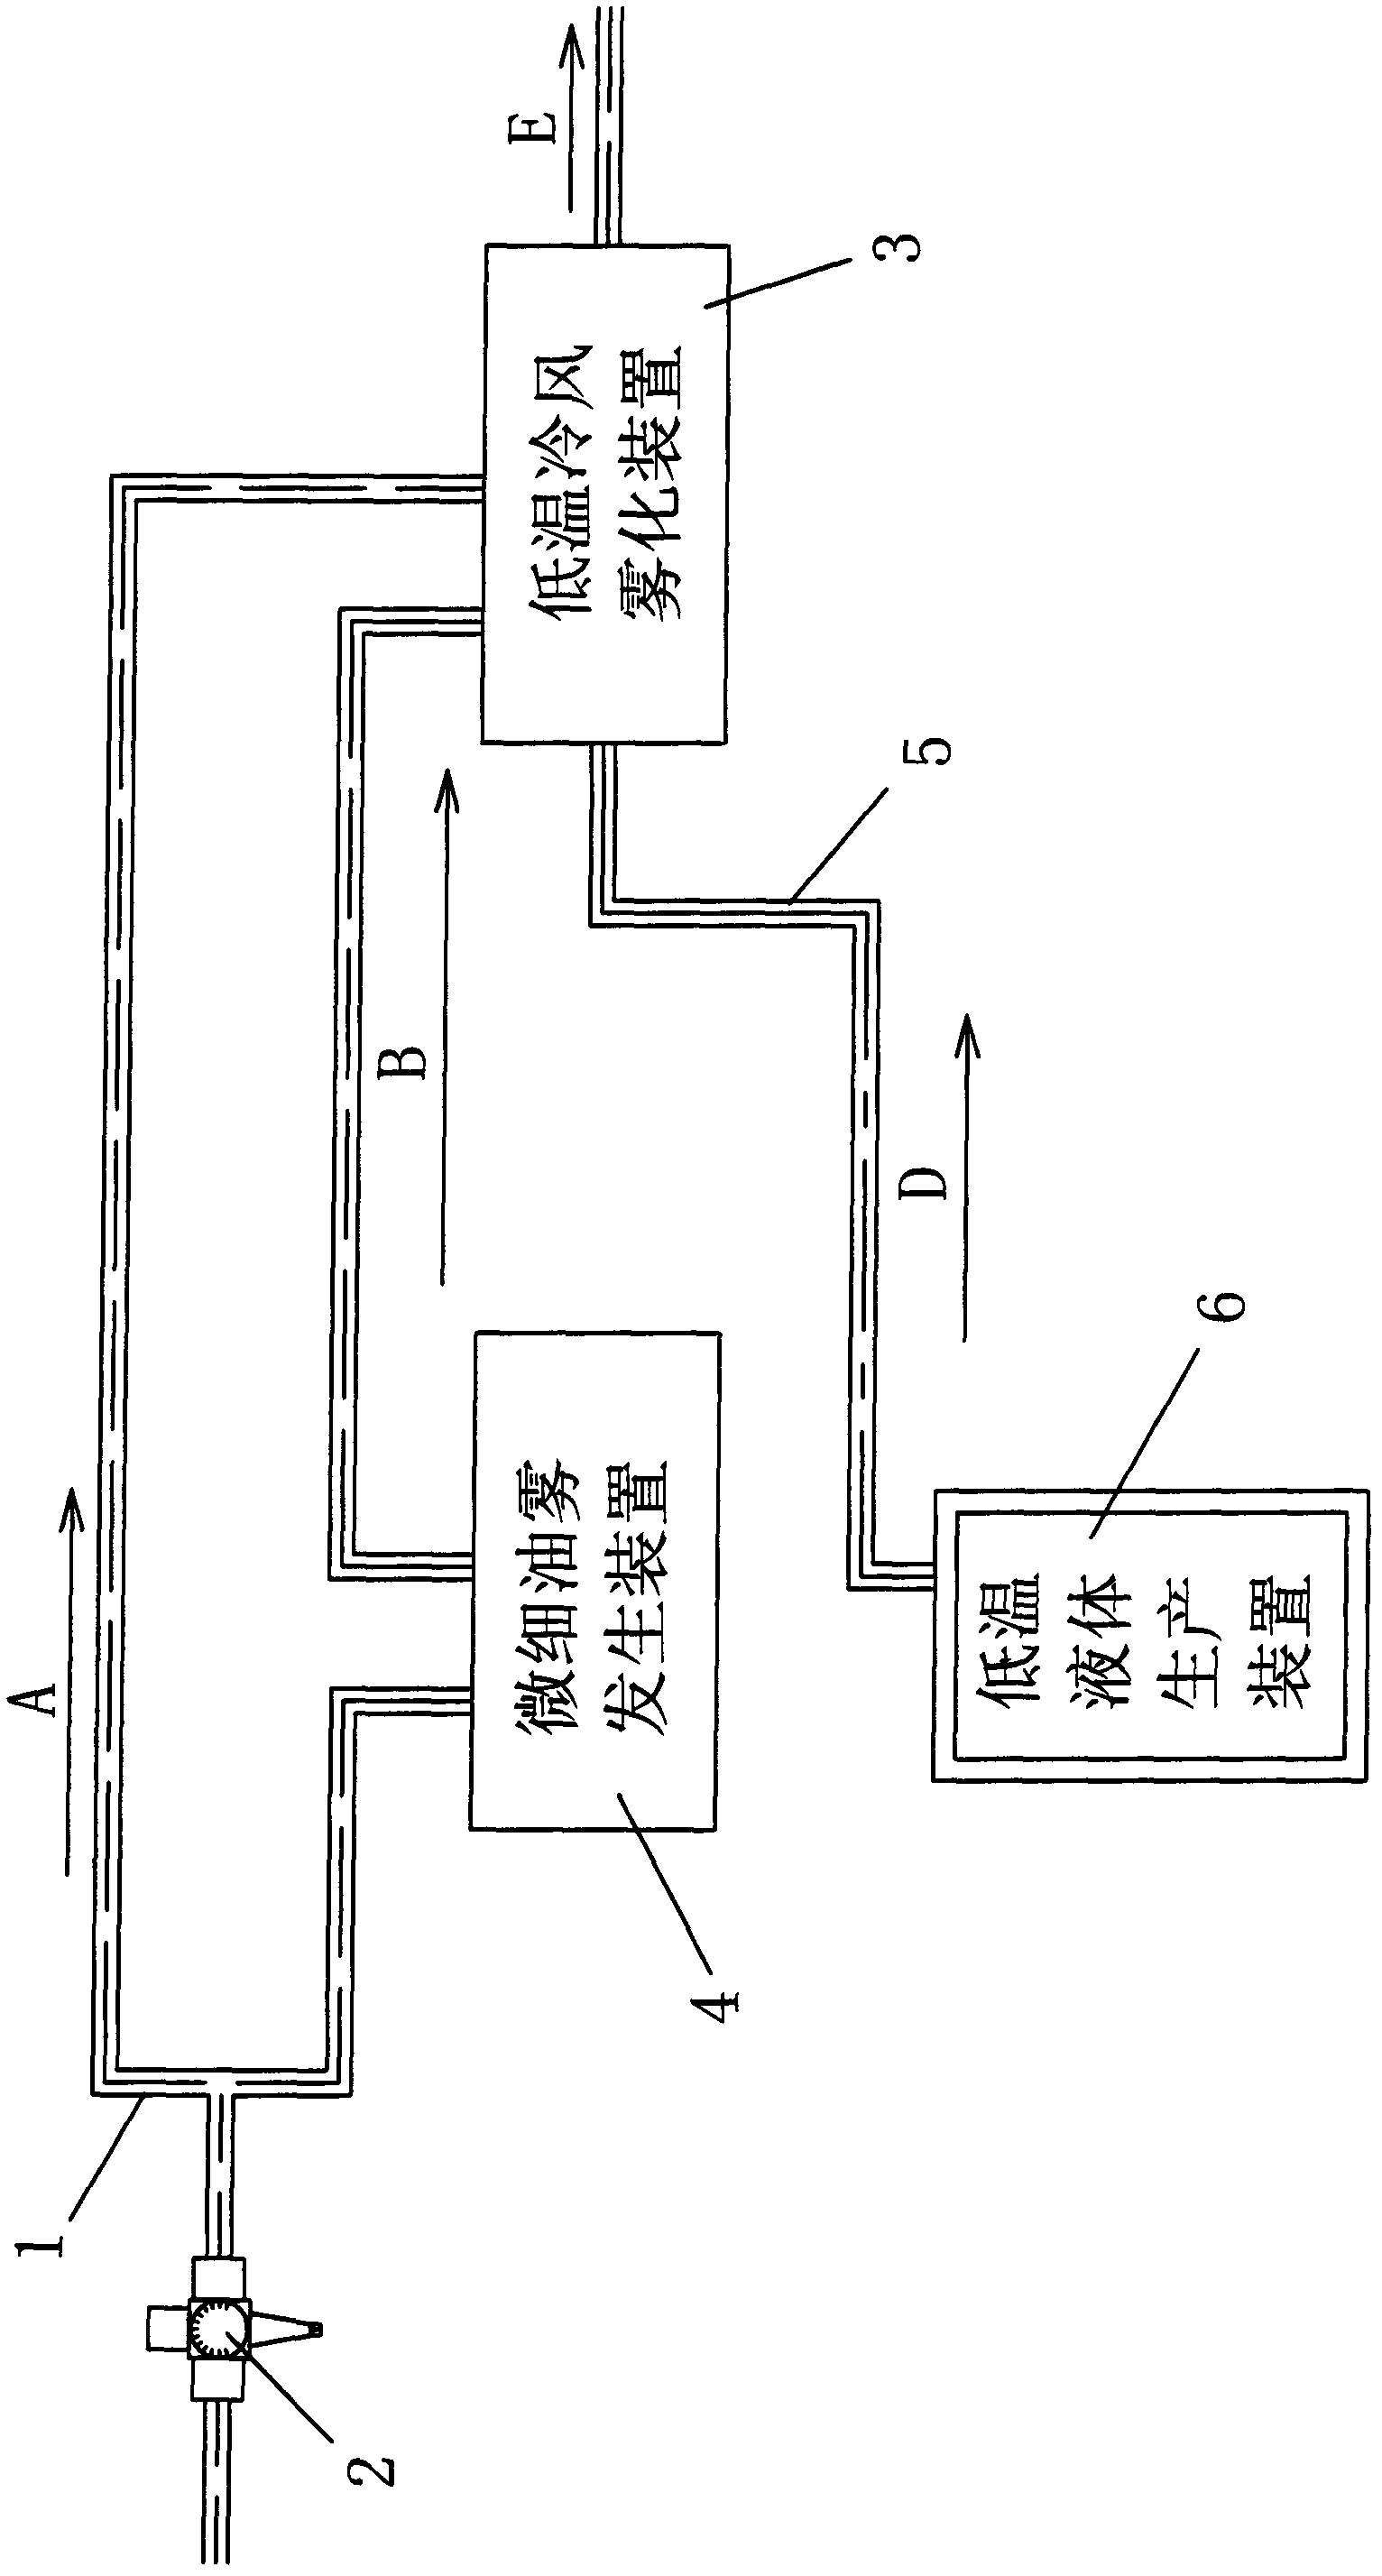 Low-energy-consumption low-temperature composite spray cutting system